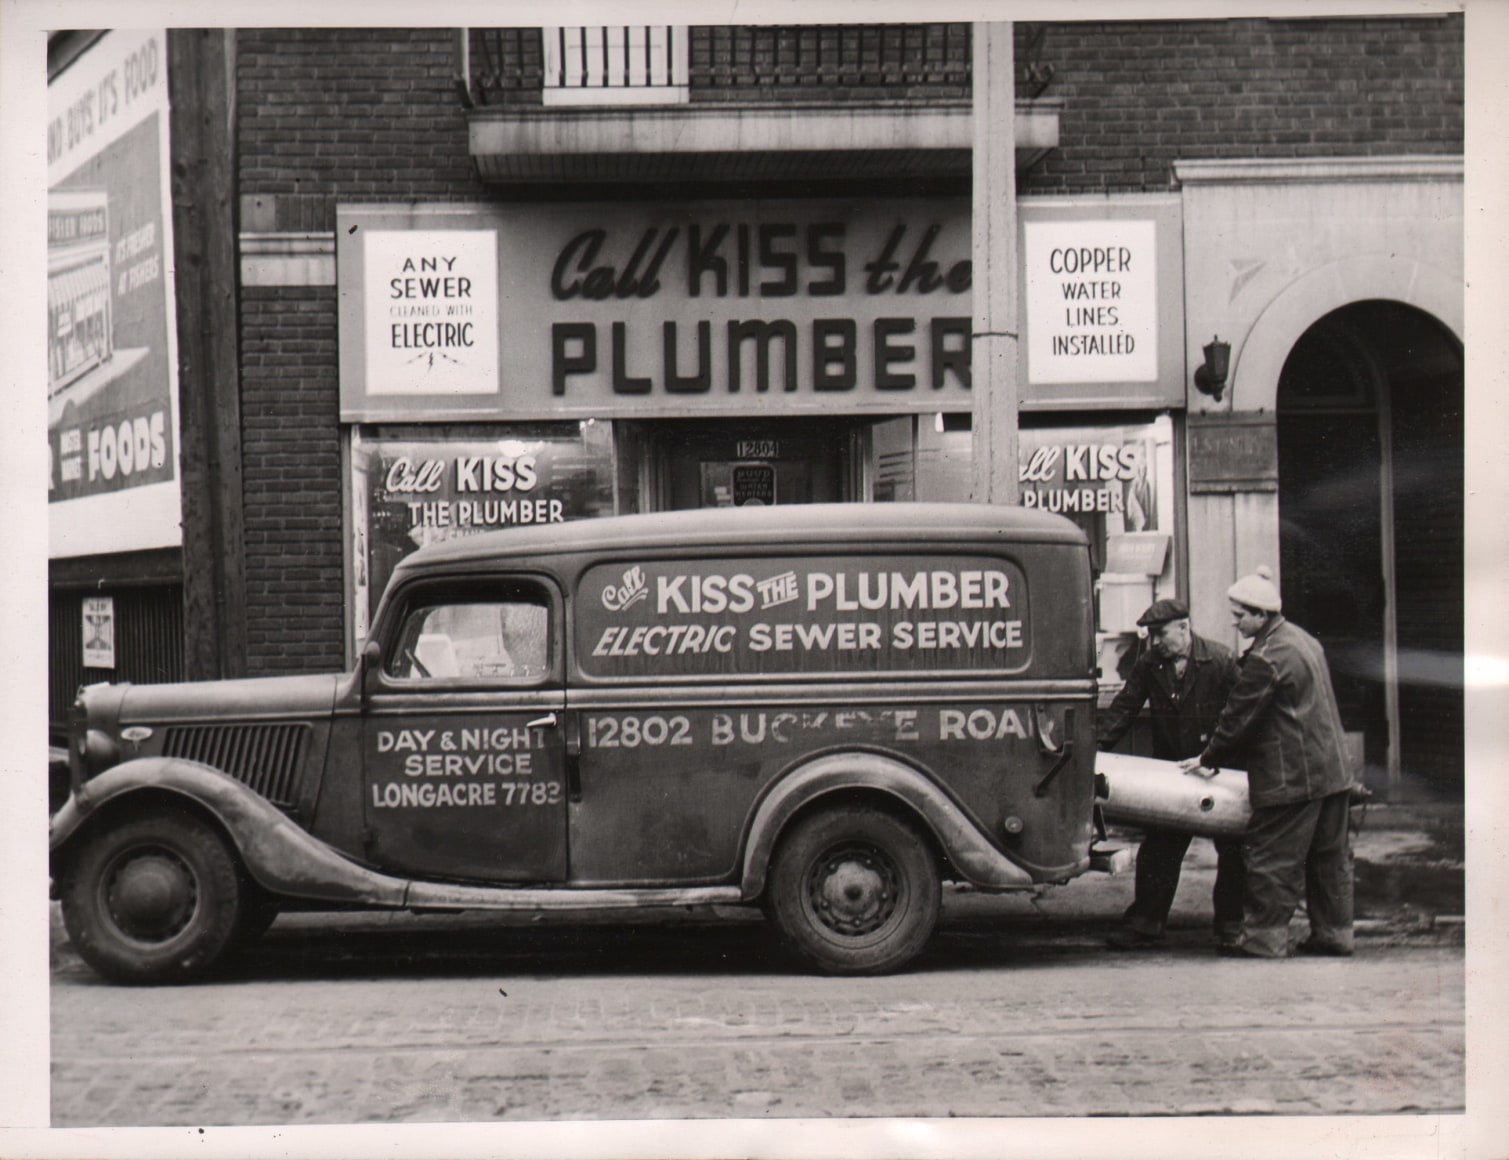 43. Acme Photo, &quot;Kiss the Plumber&quot; - A Business, Not a Pastime, February 1, 1946. Men loading a truck marked &quot;Call Kiss the Plumber Electric Sewer Services&quot; in front of a storefront with the same name.